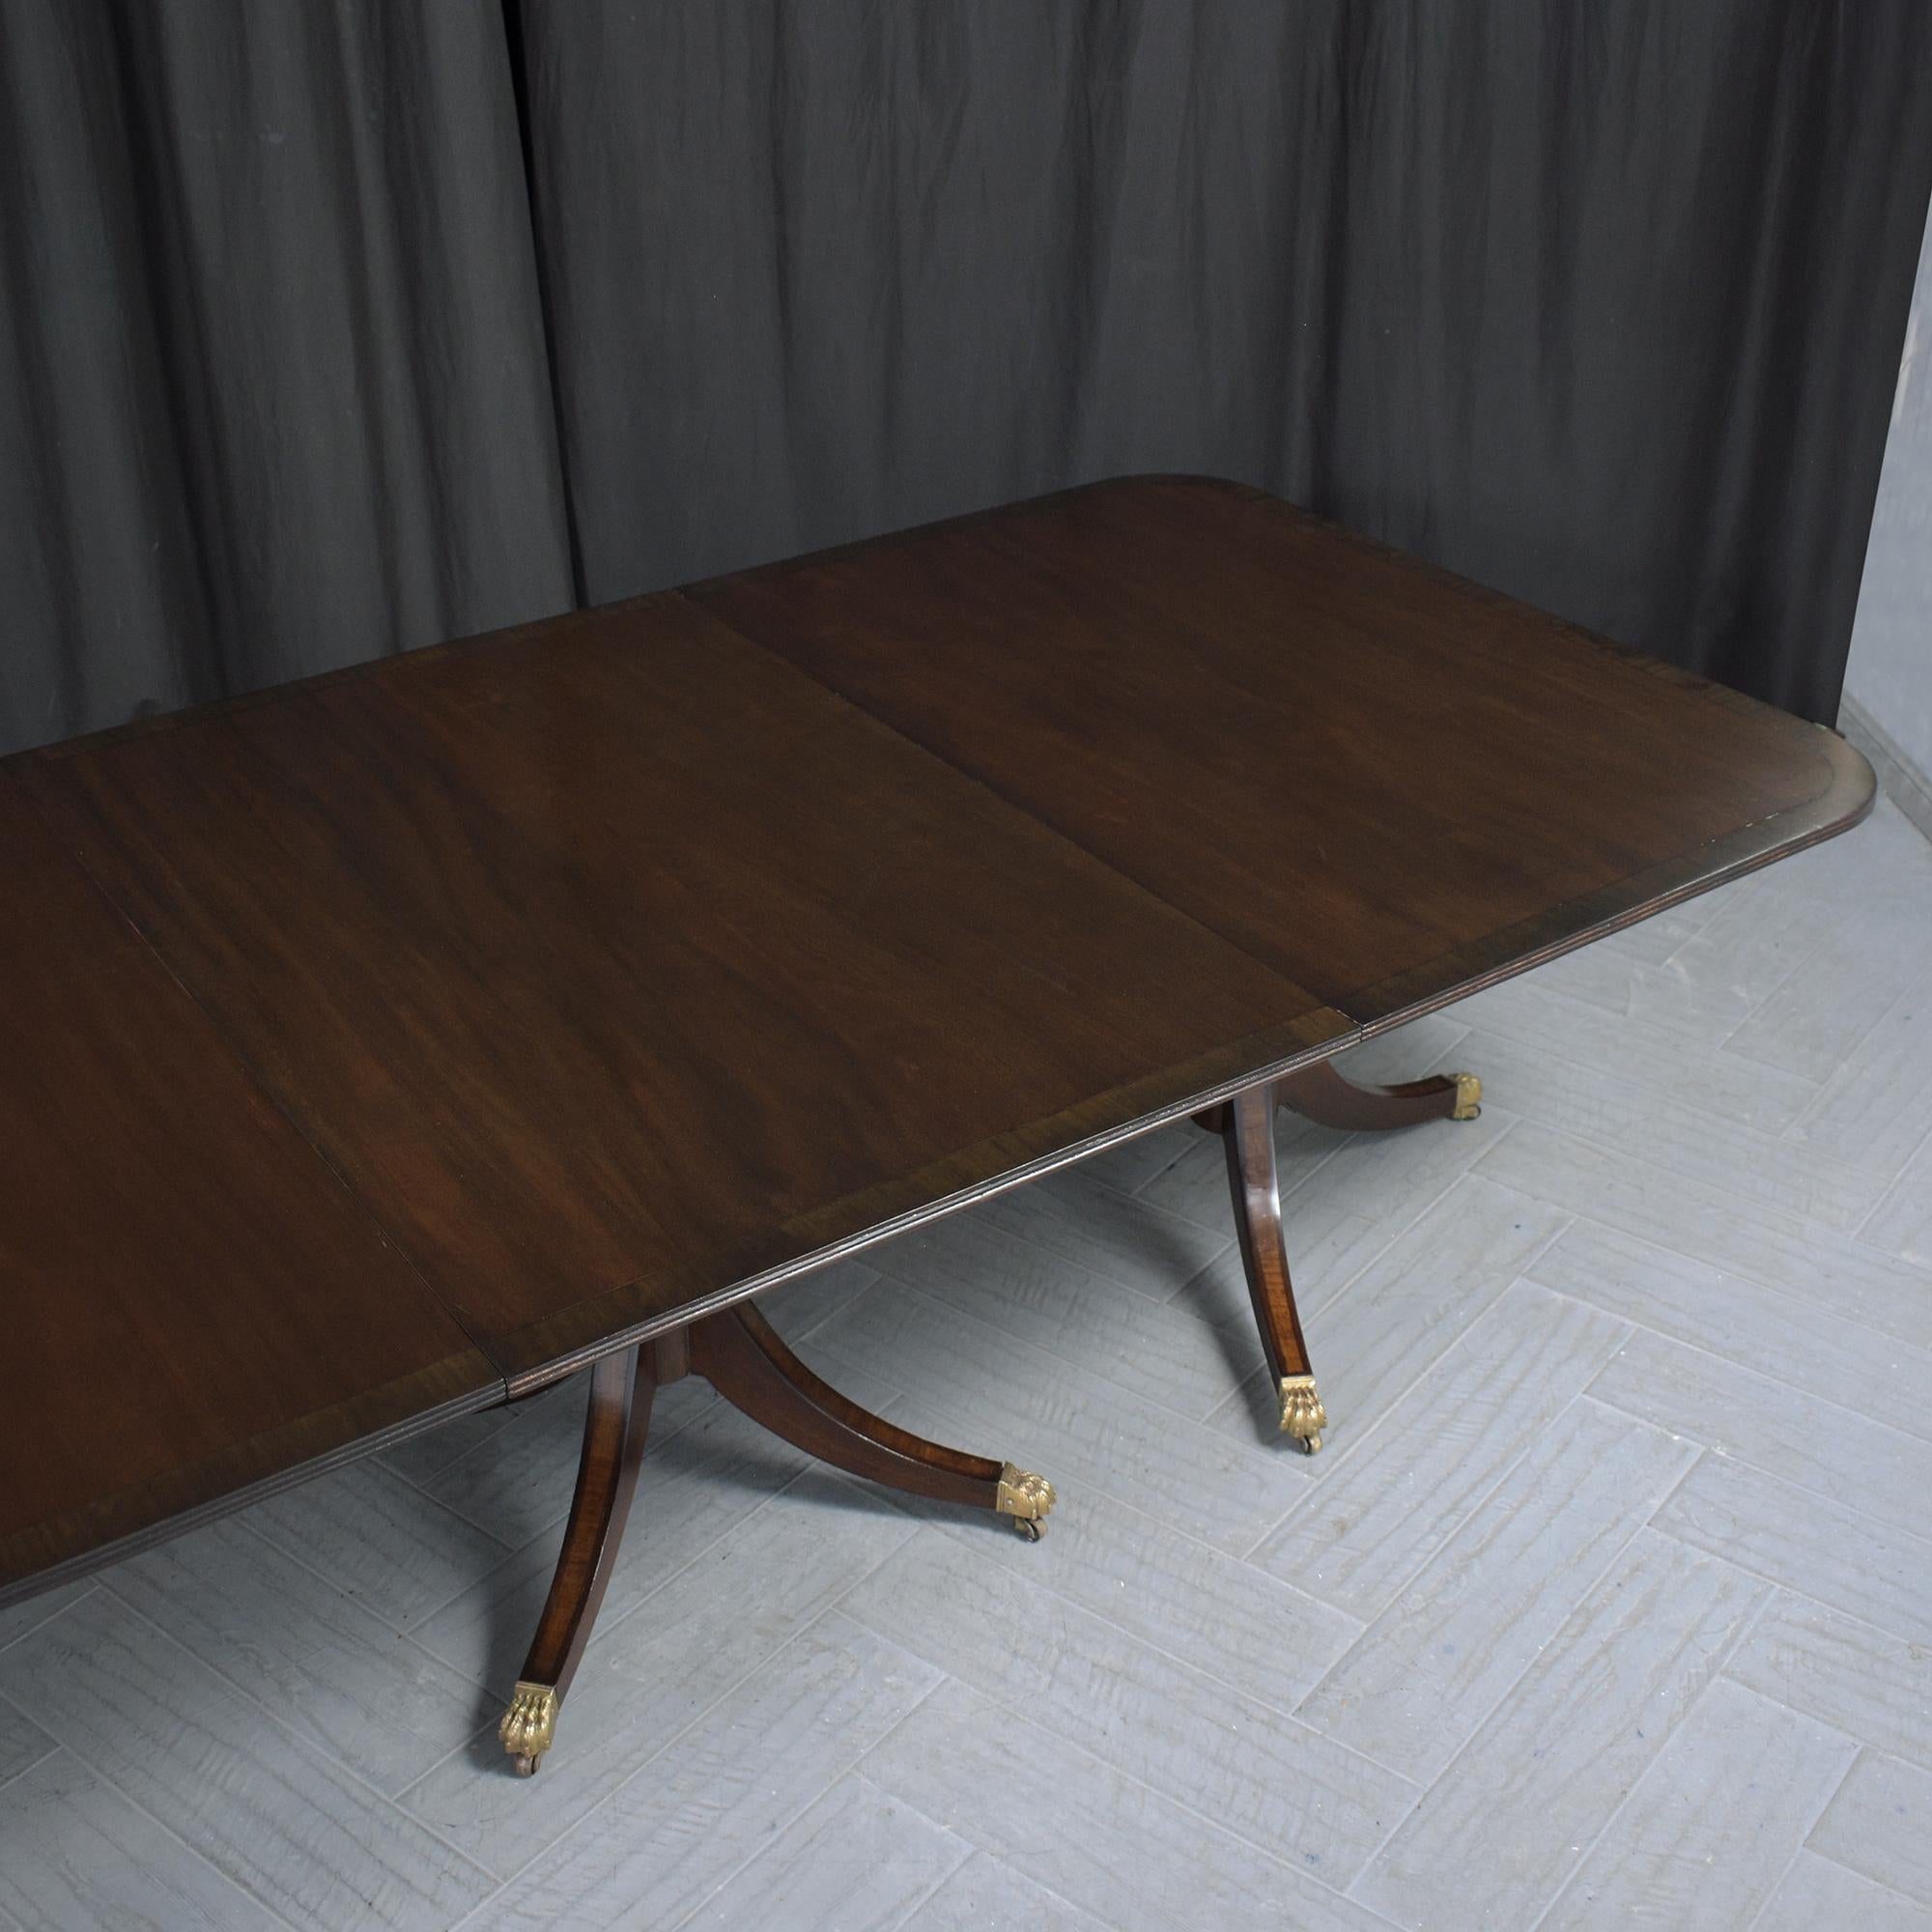 Restored 1890s George III Mahogany Dining Table with Extendable Leaves For Sale 7